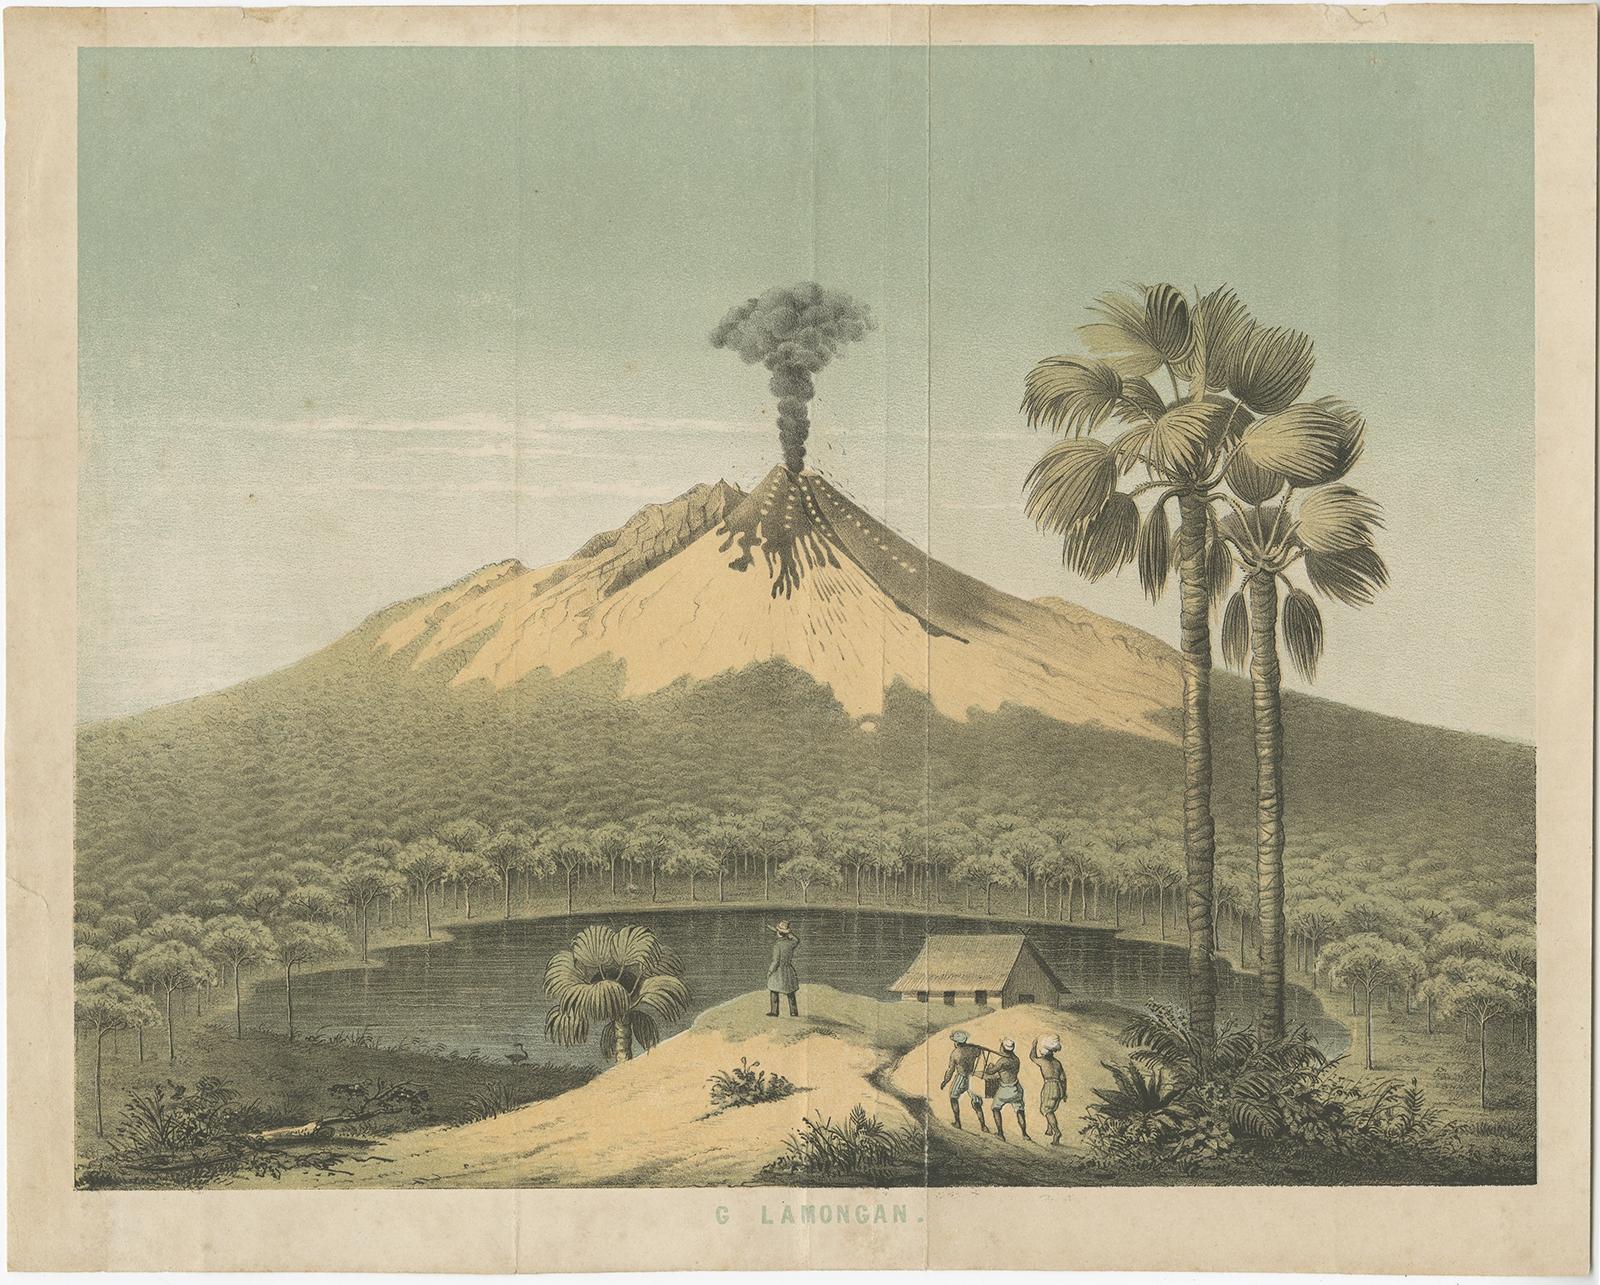 Antique print titled 'G. Lamongan'. Beautiful lithograph of Gunung Lamongan. Gunung Lamongan or Mount Lamongan (1,651m - 5, 417 ft) is a small stratovolcano located between the massif Tengger caldera complex and Iyang-Argapura volcano complex in